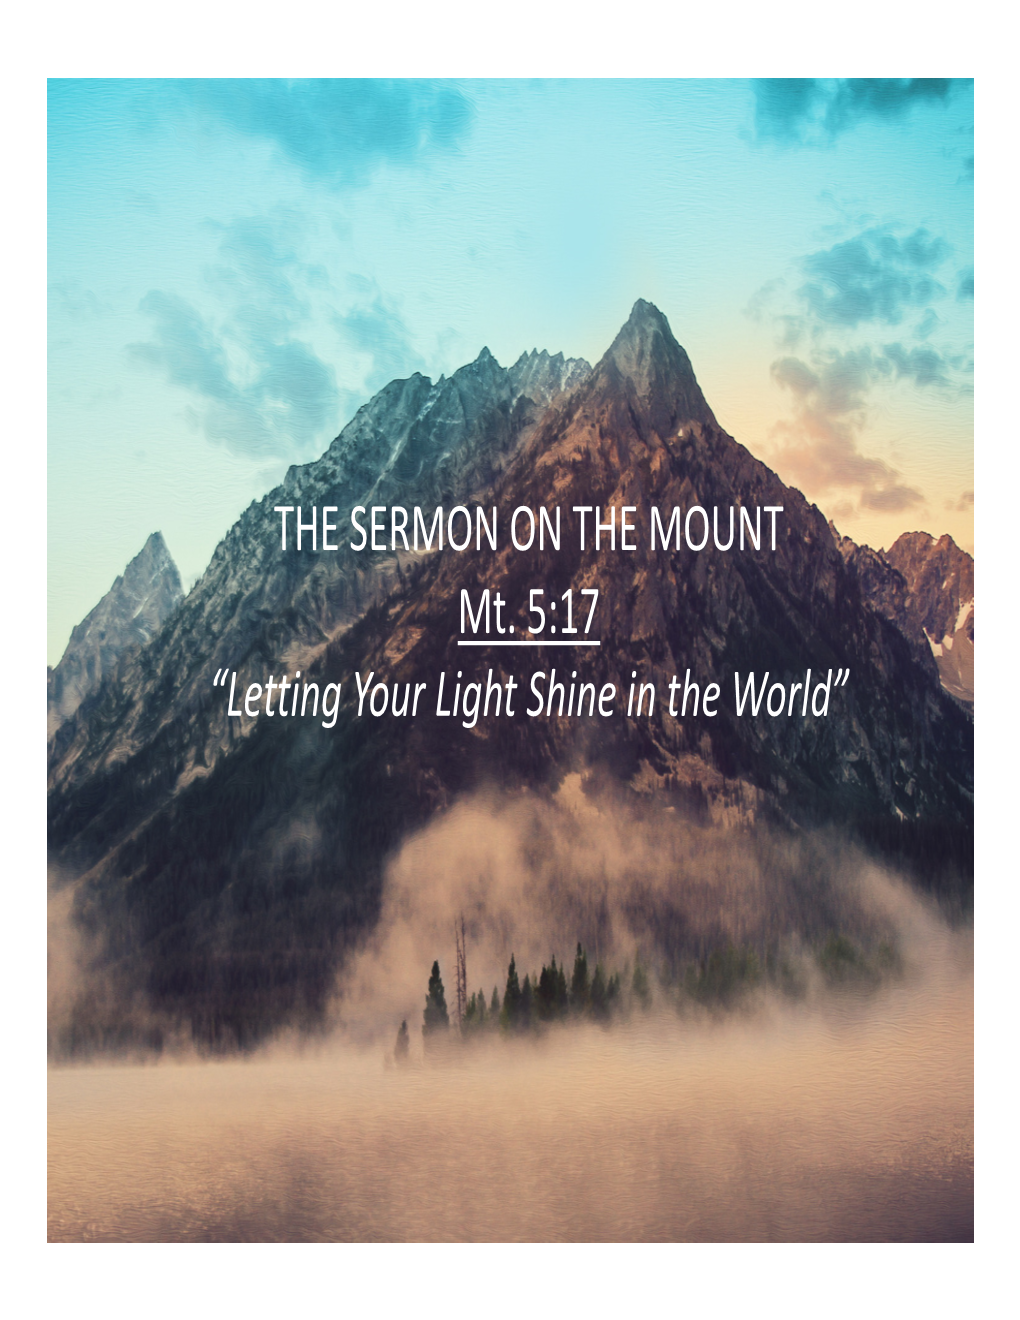 THE SERMON on the MOUNT Mt. 5:17 “Letting Your Light Shine in the World” Mt